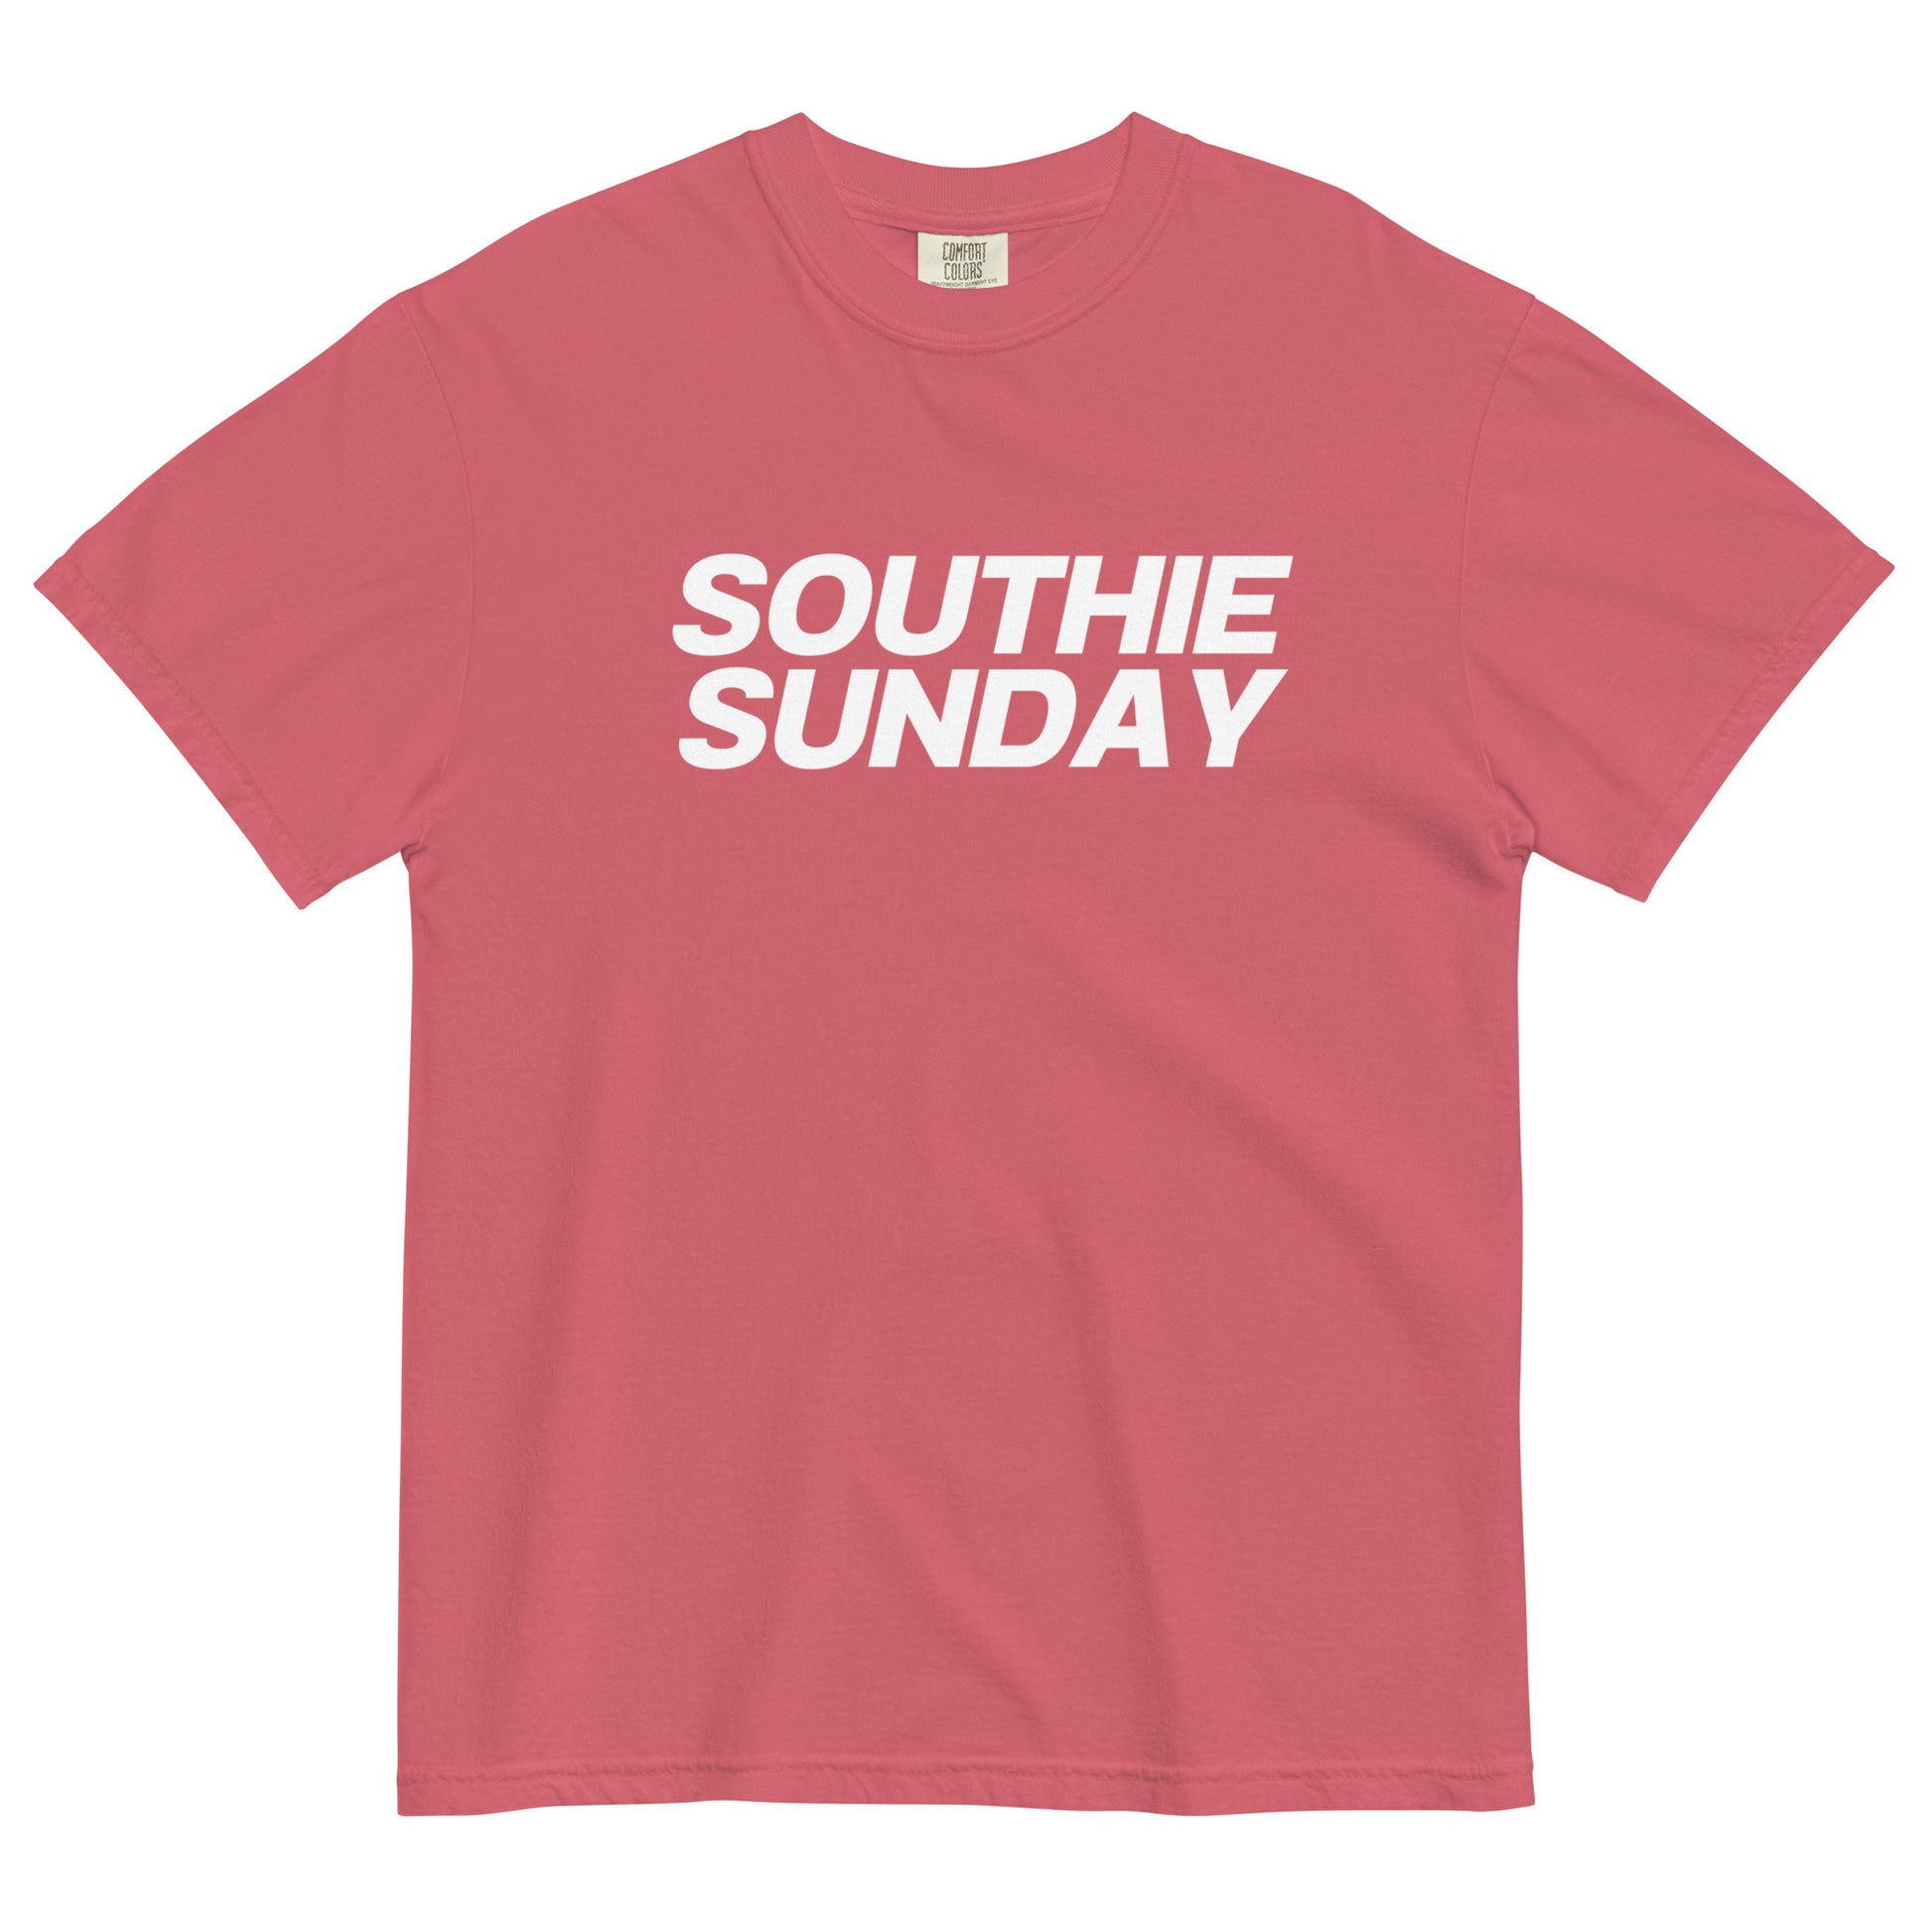 light red tshirt that says "southie sunday" in white lettering